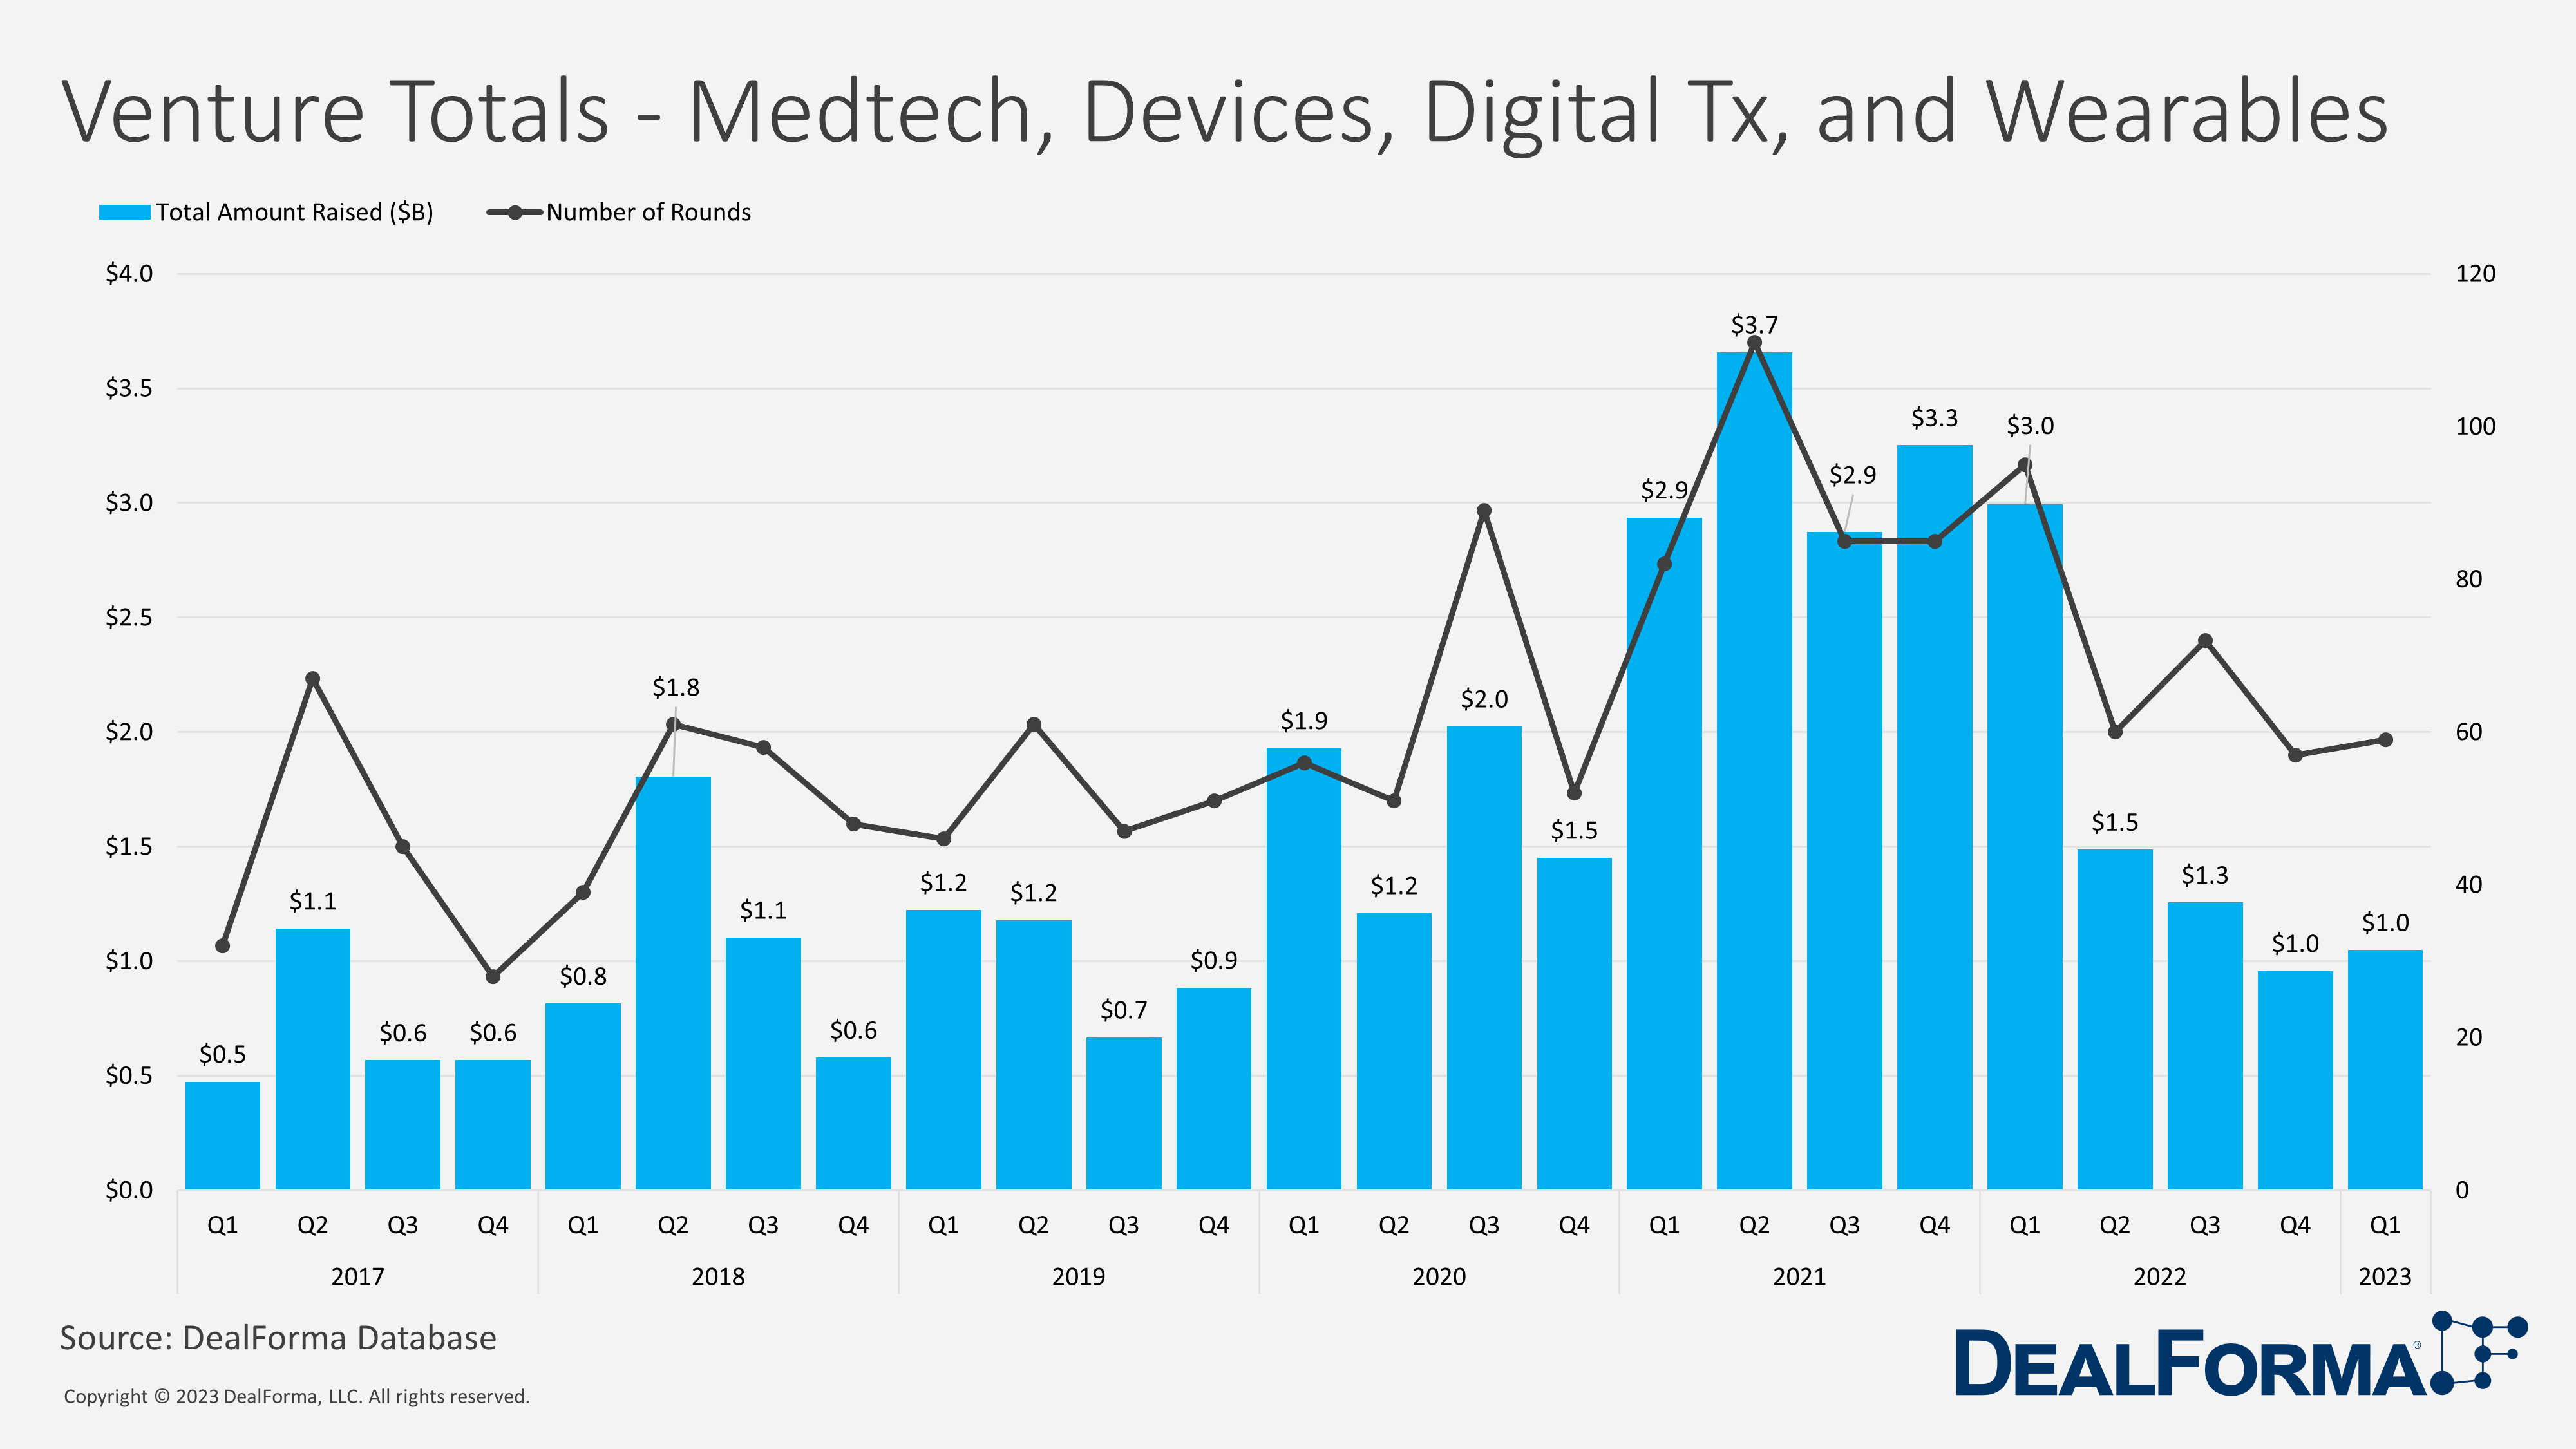 Venture Totals - Medtech, Devices, Digital Tx, and Wearables